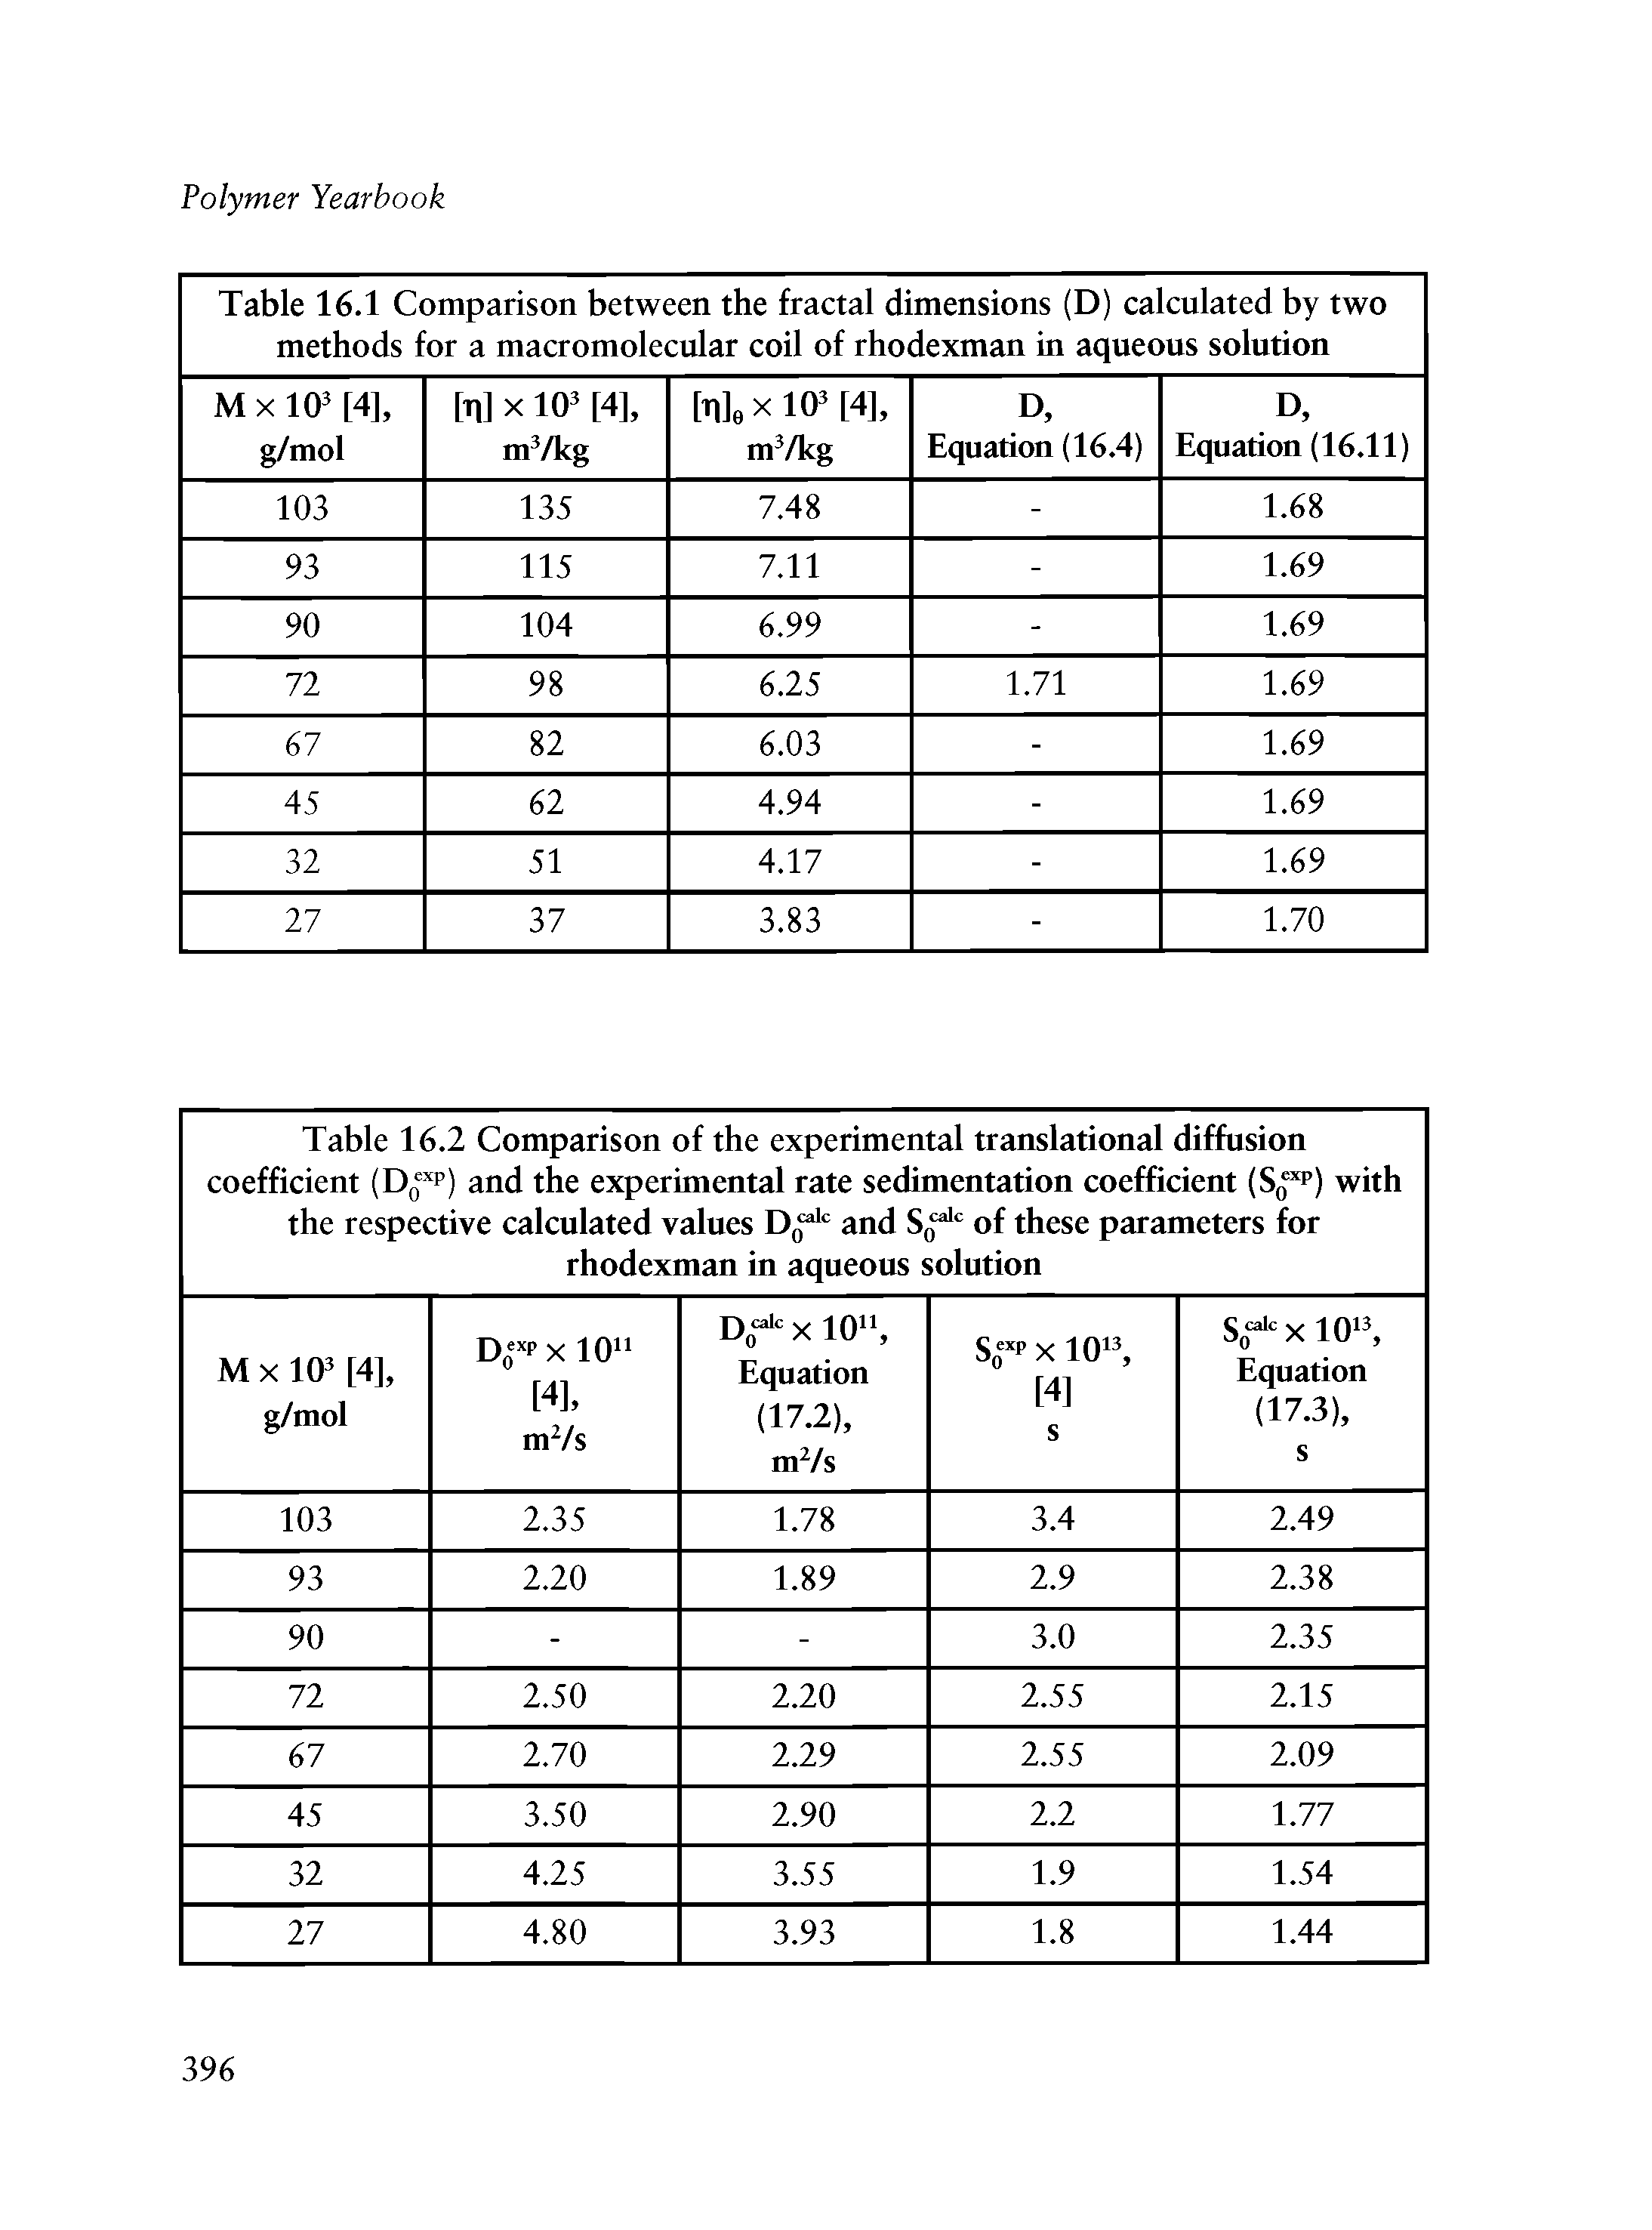 Table 16.2 Comparison of the experimental translational diffusion coefficient (Dq p) and the experimental rate sedimentation coefficient (Sq p) with the respective calculated values and of these parameters for rhodexman in aqueous solution ...